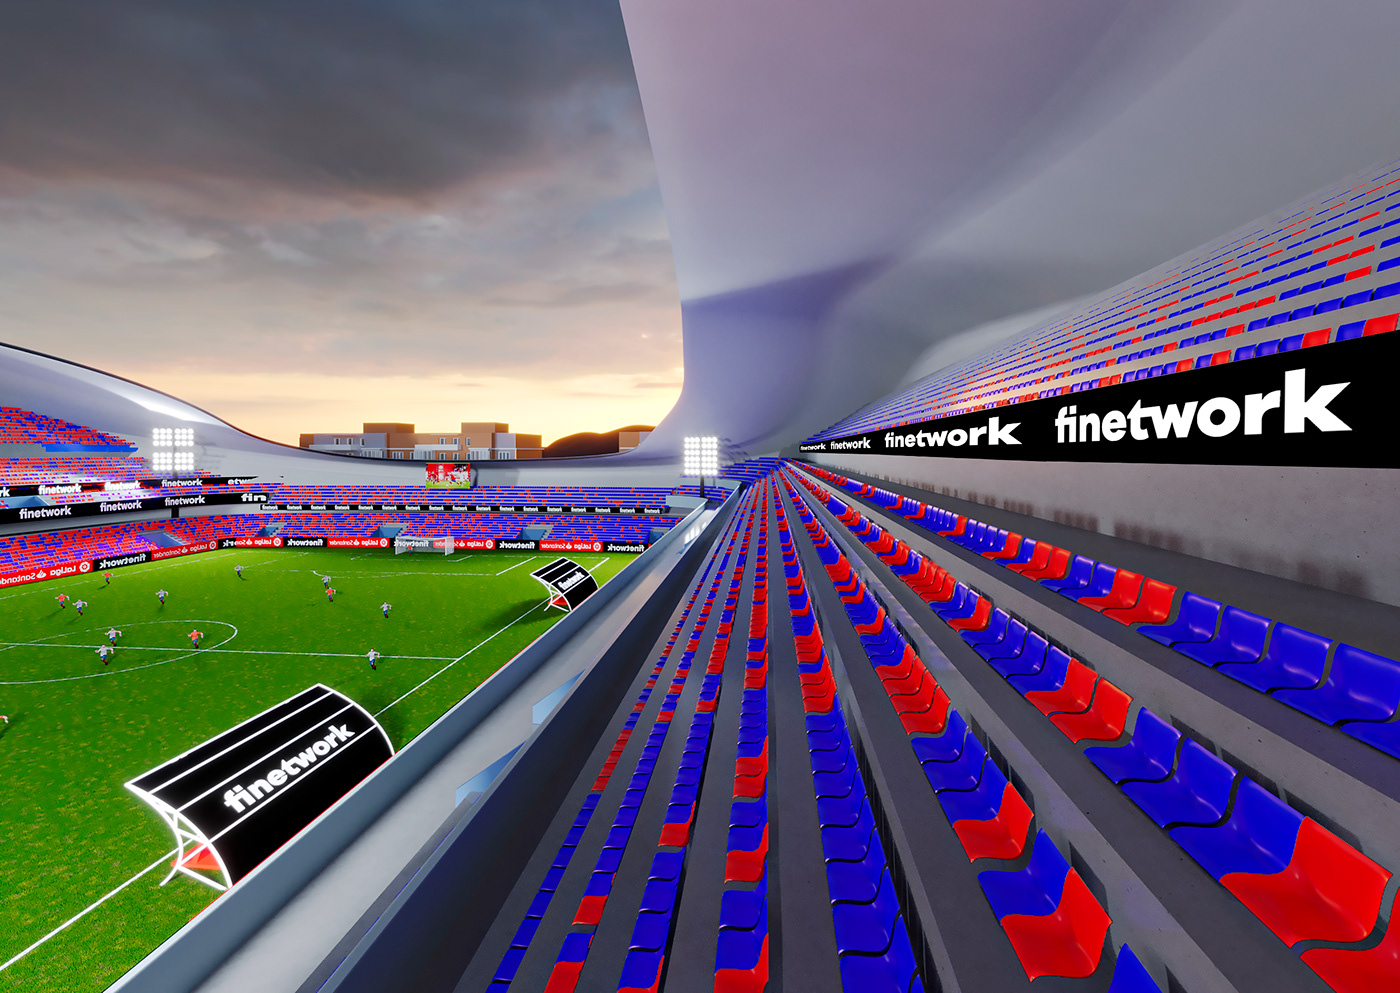 This image is the interior of the new stadium, shows a football game and a lot of people in crowd